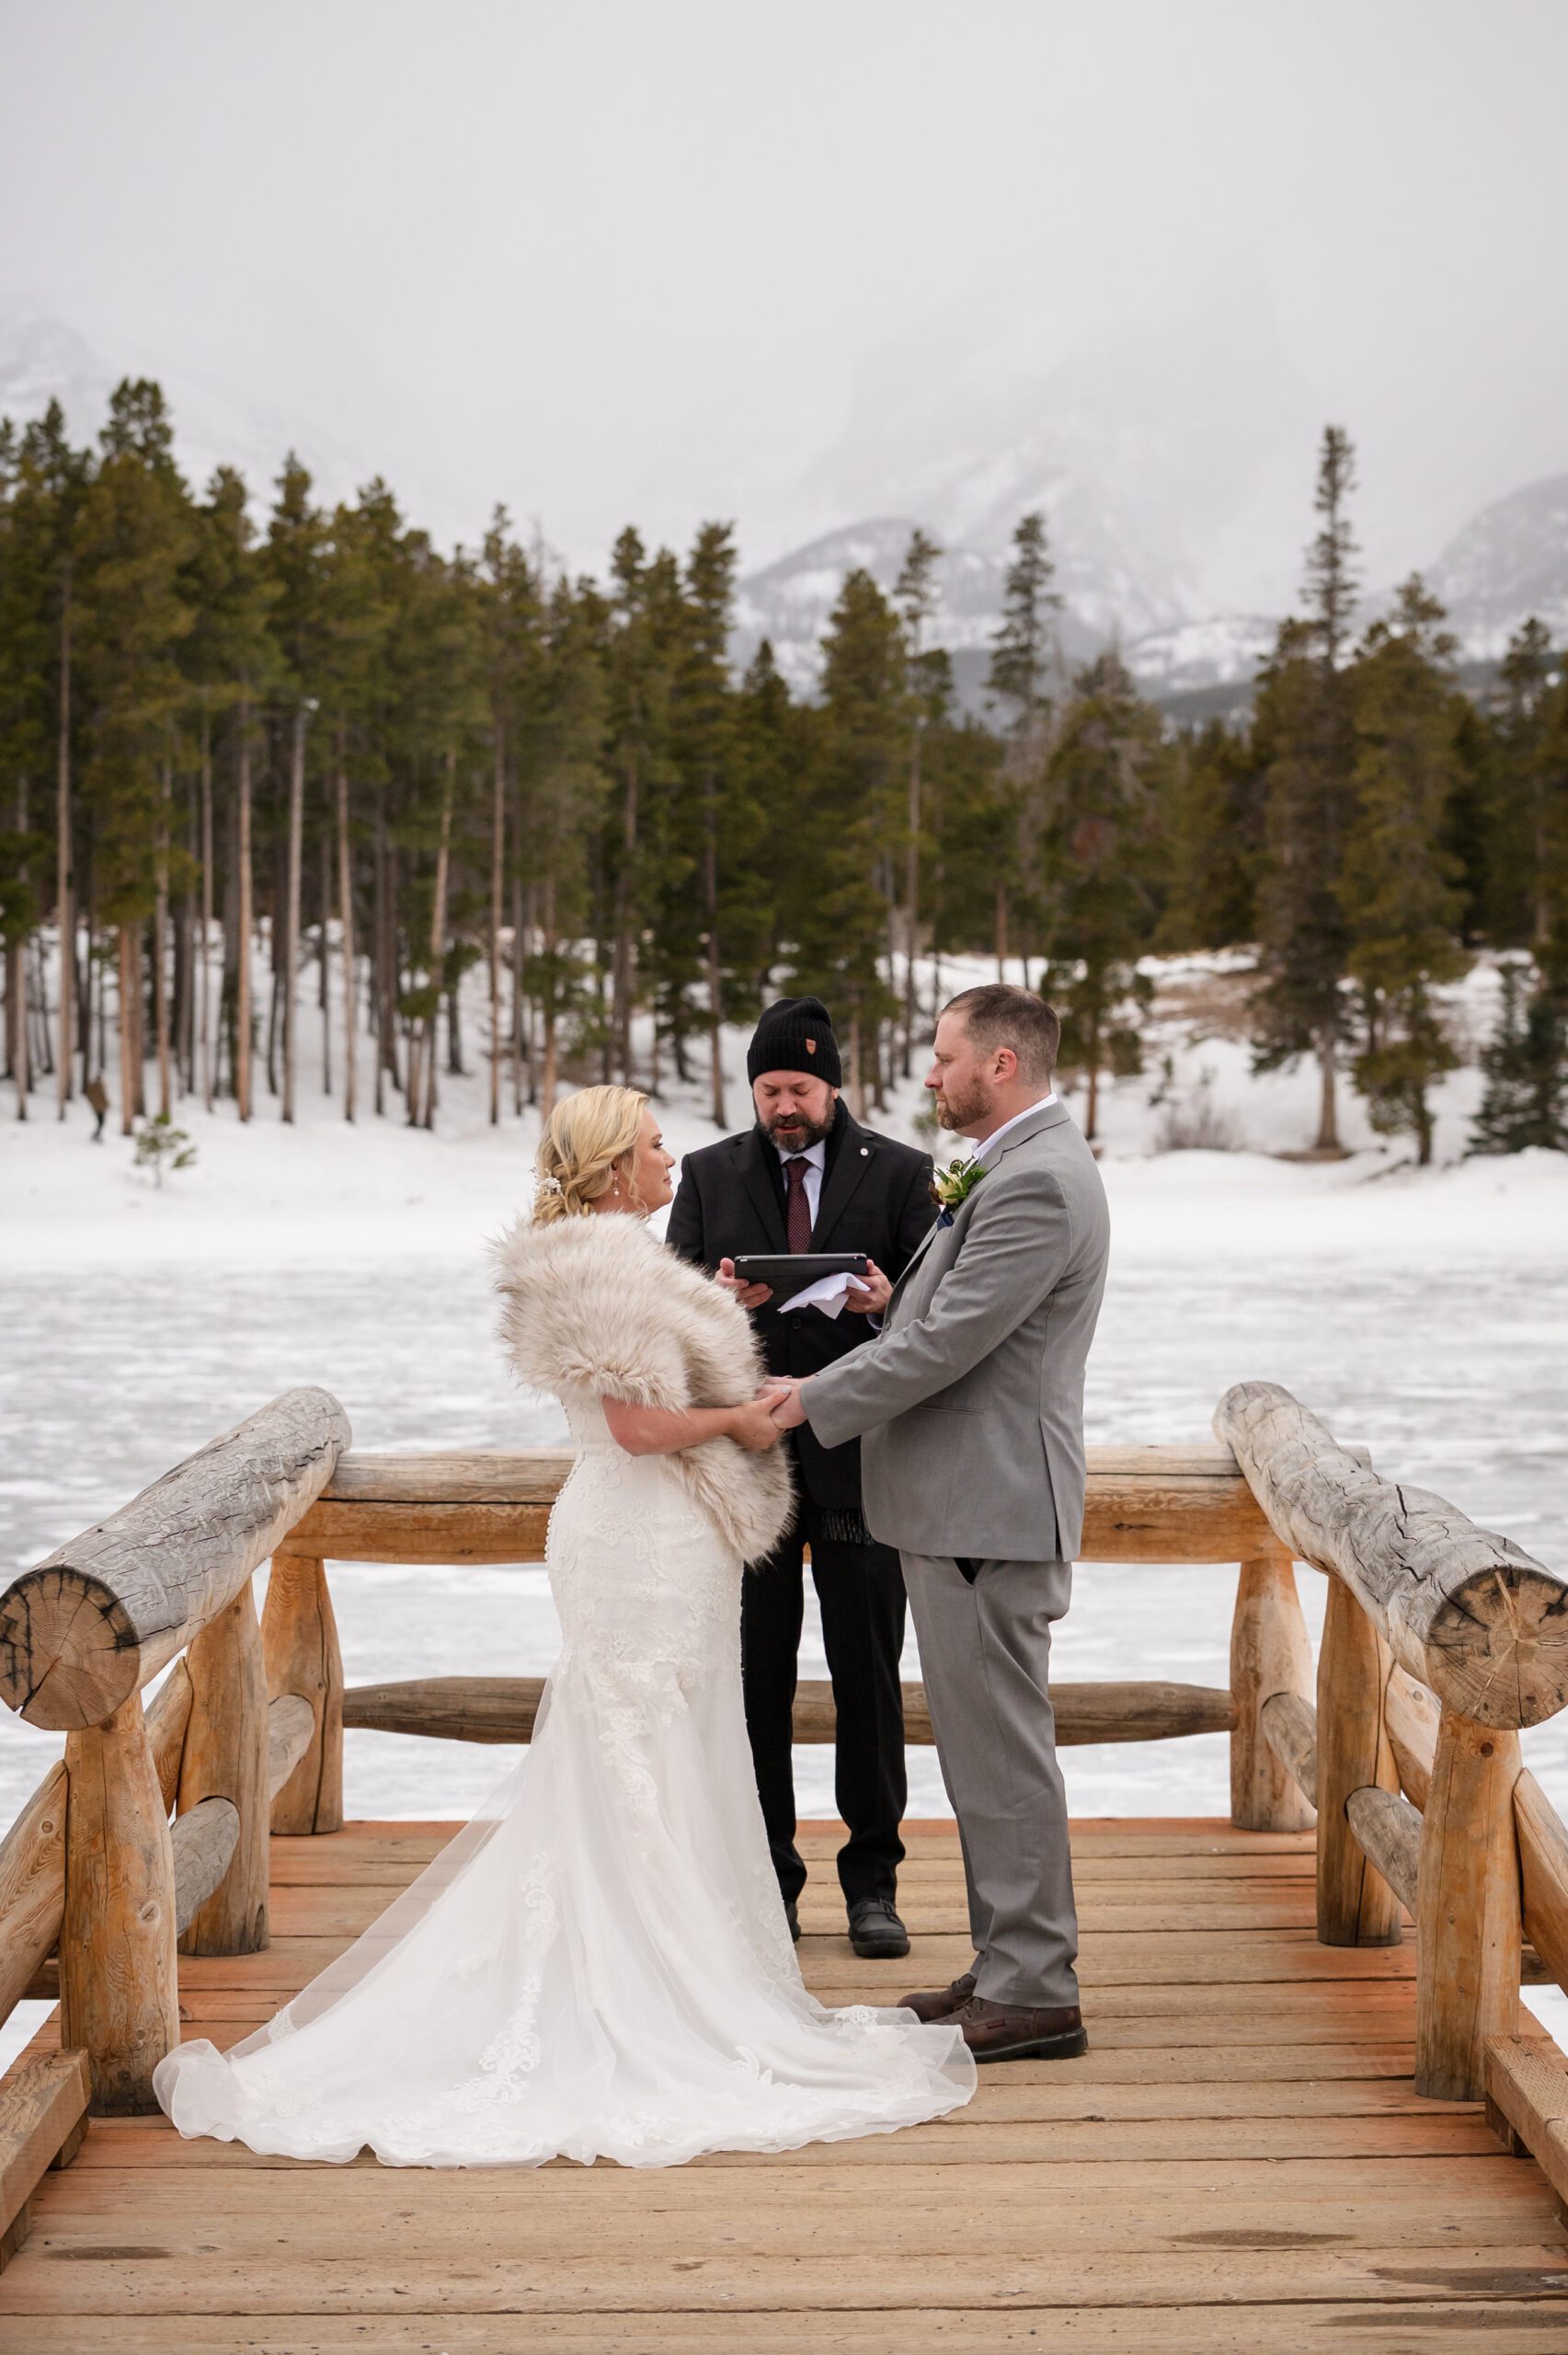 The bride and groom hold hands during their Winter Elopement ceremony at Sprague Lake. 